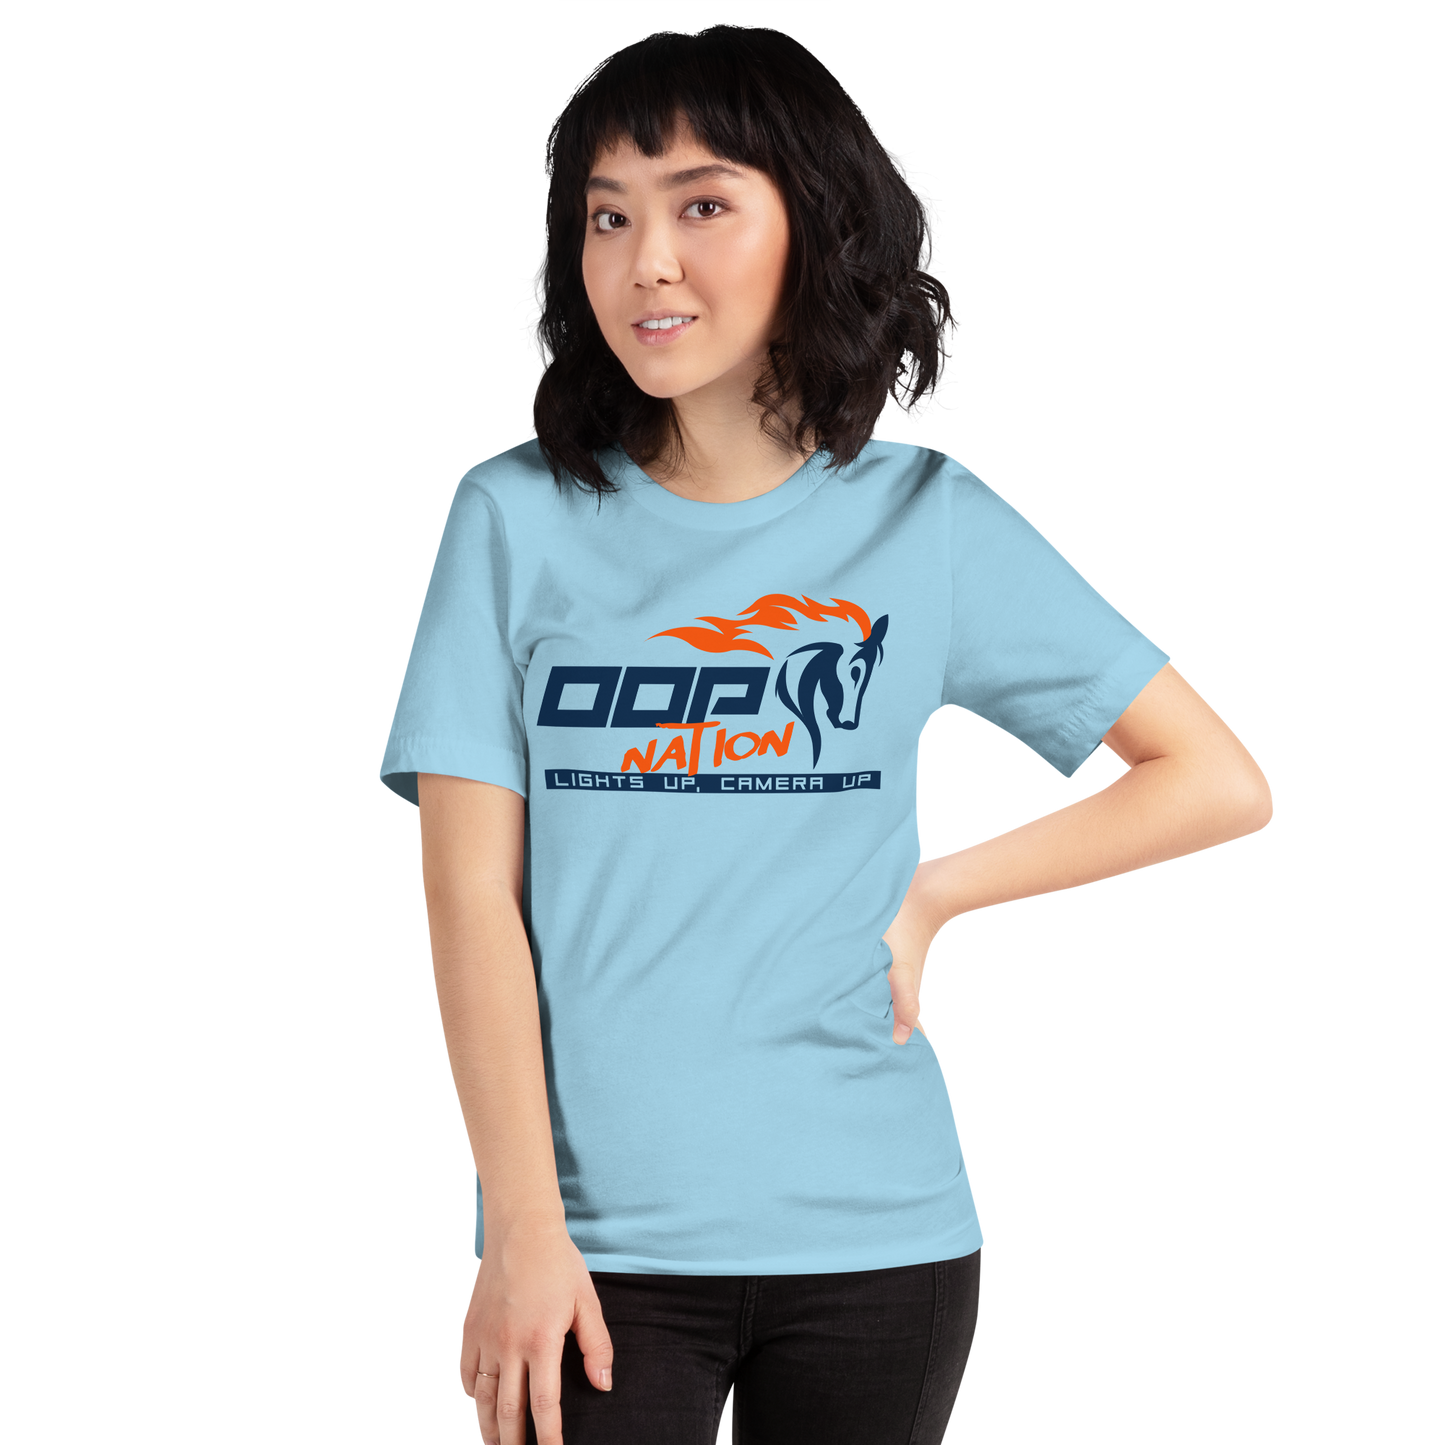 Adult Oop Nation Staple T-Shirt